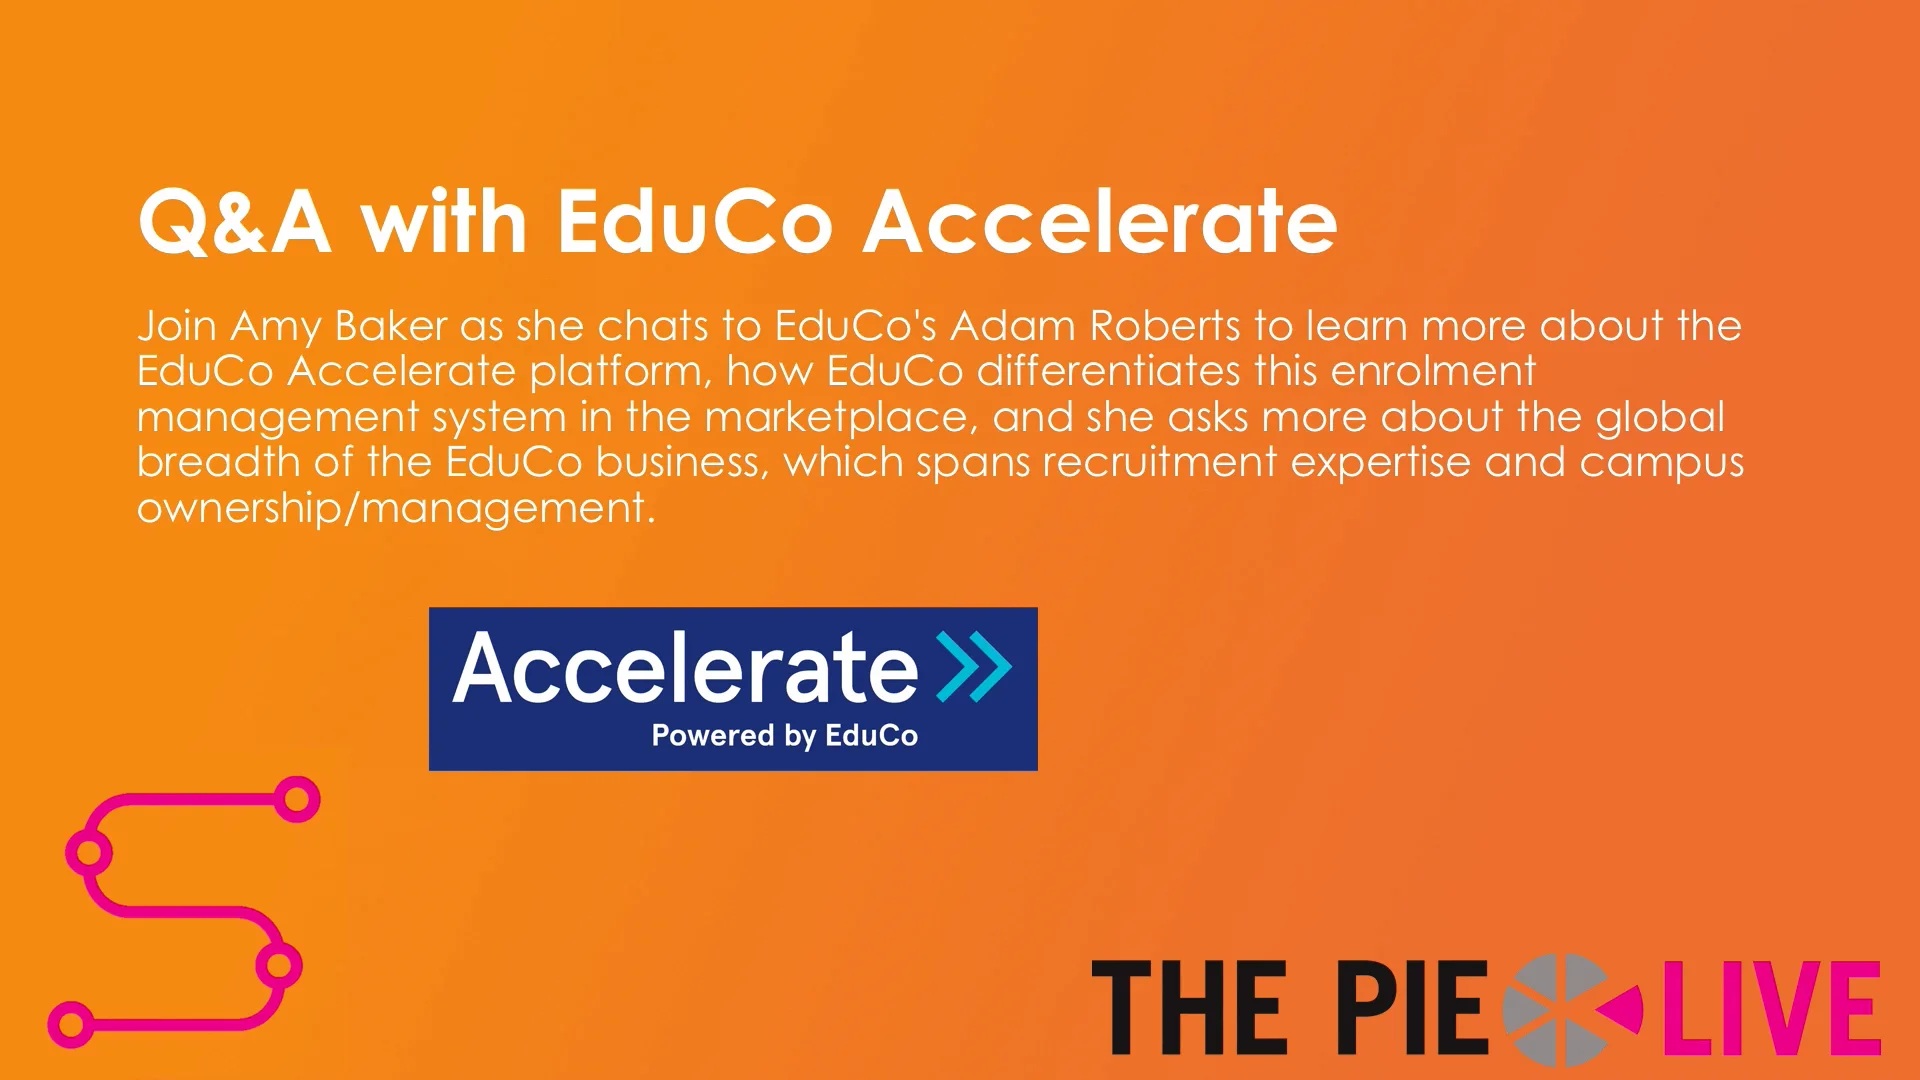 D1_S05_Q&A with EduCo Accelerate.mp4 on Vimeo